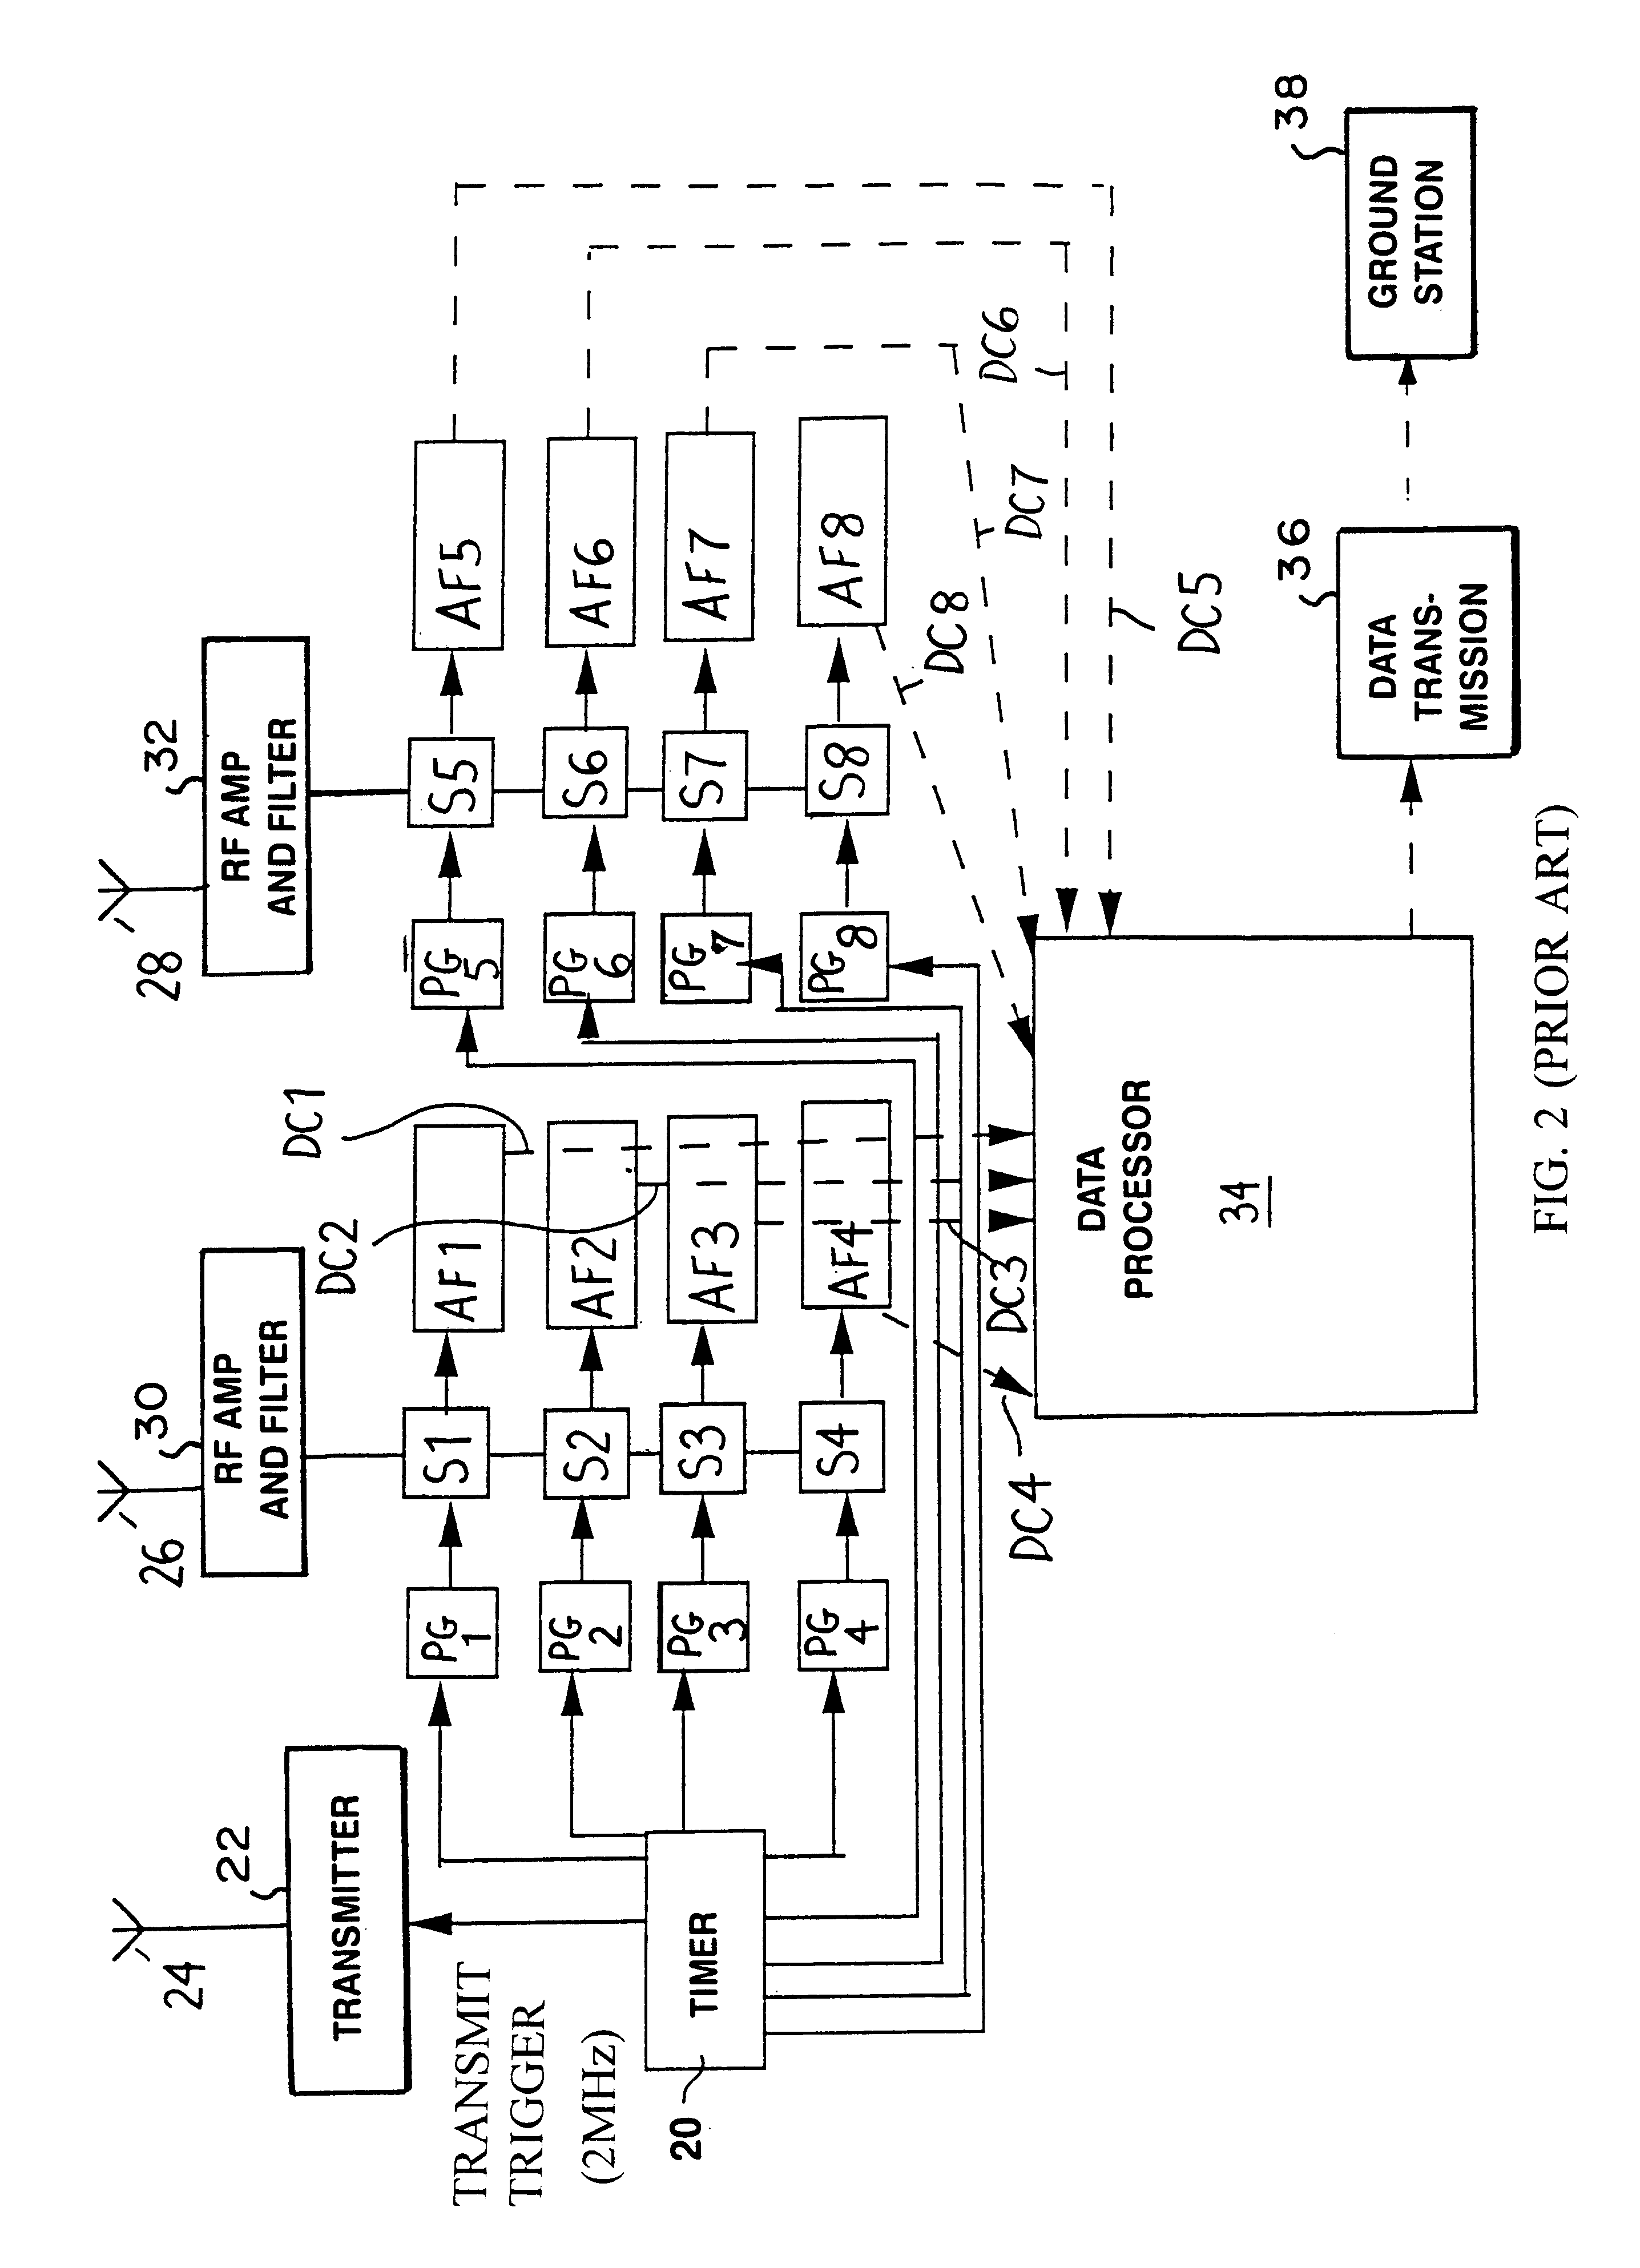 Apparatus for and method of determining positional information for an object